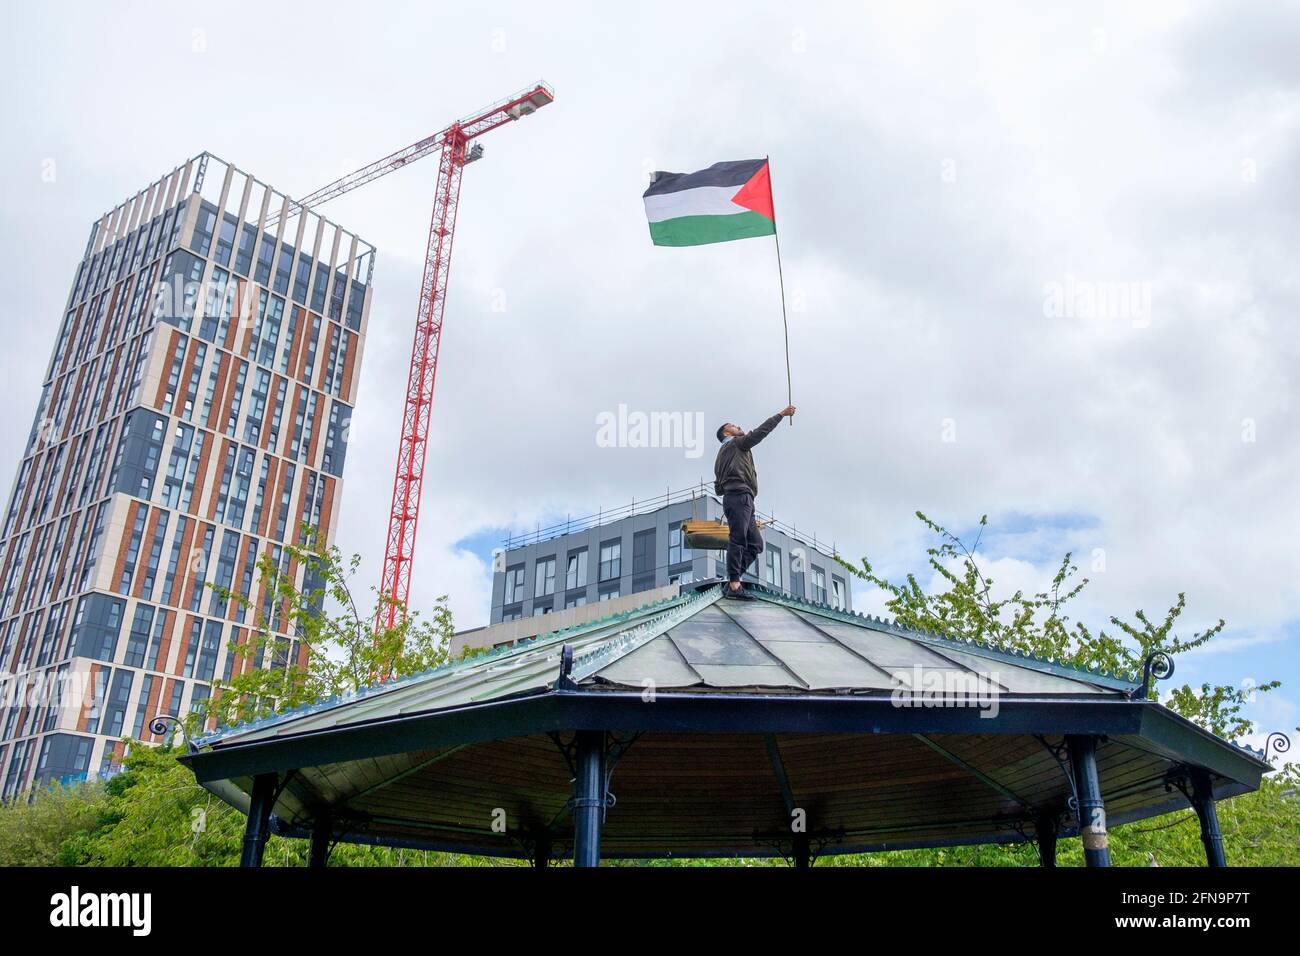 Bristol, UK. 15th May, 2021. A Pro-Palestinian protester is pictured waving a Palestinian flag on top of a band stand in Castle Park as Pro-Palestinian supporters listen to speeches after a Pro-Palestinian protest march through Bristol. The protest march and rally was held to allow people to show their support and solidarity with the Palestinian people after 73 Years of Nakba and to protest about Israel's recent actions in Gaza. Credit: Lynchpics/Alamy Live News Stock Photo